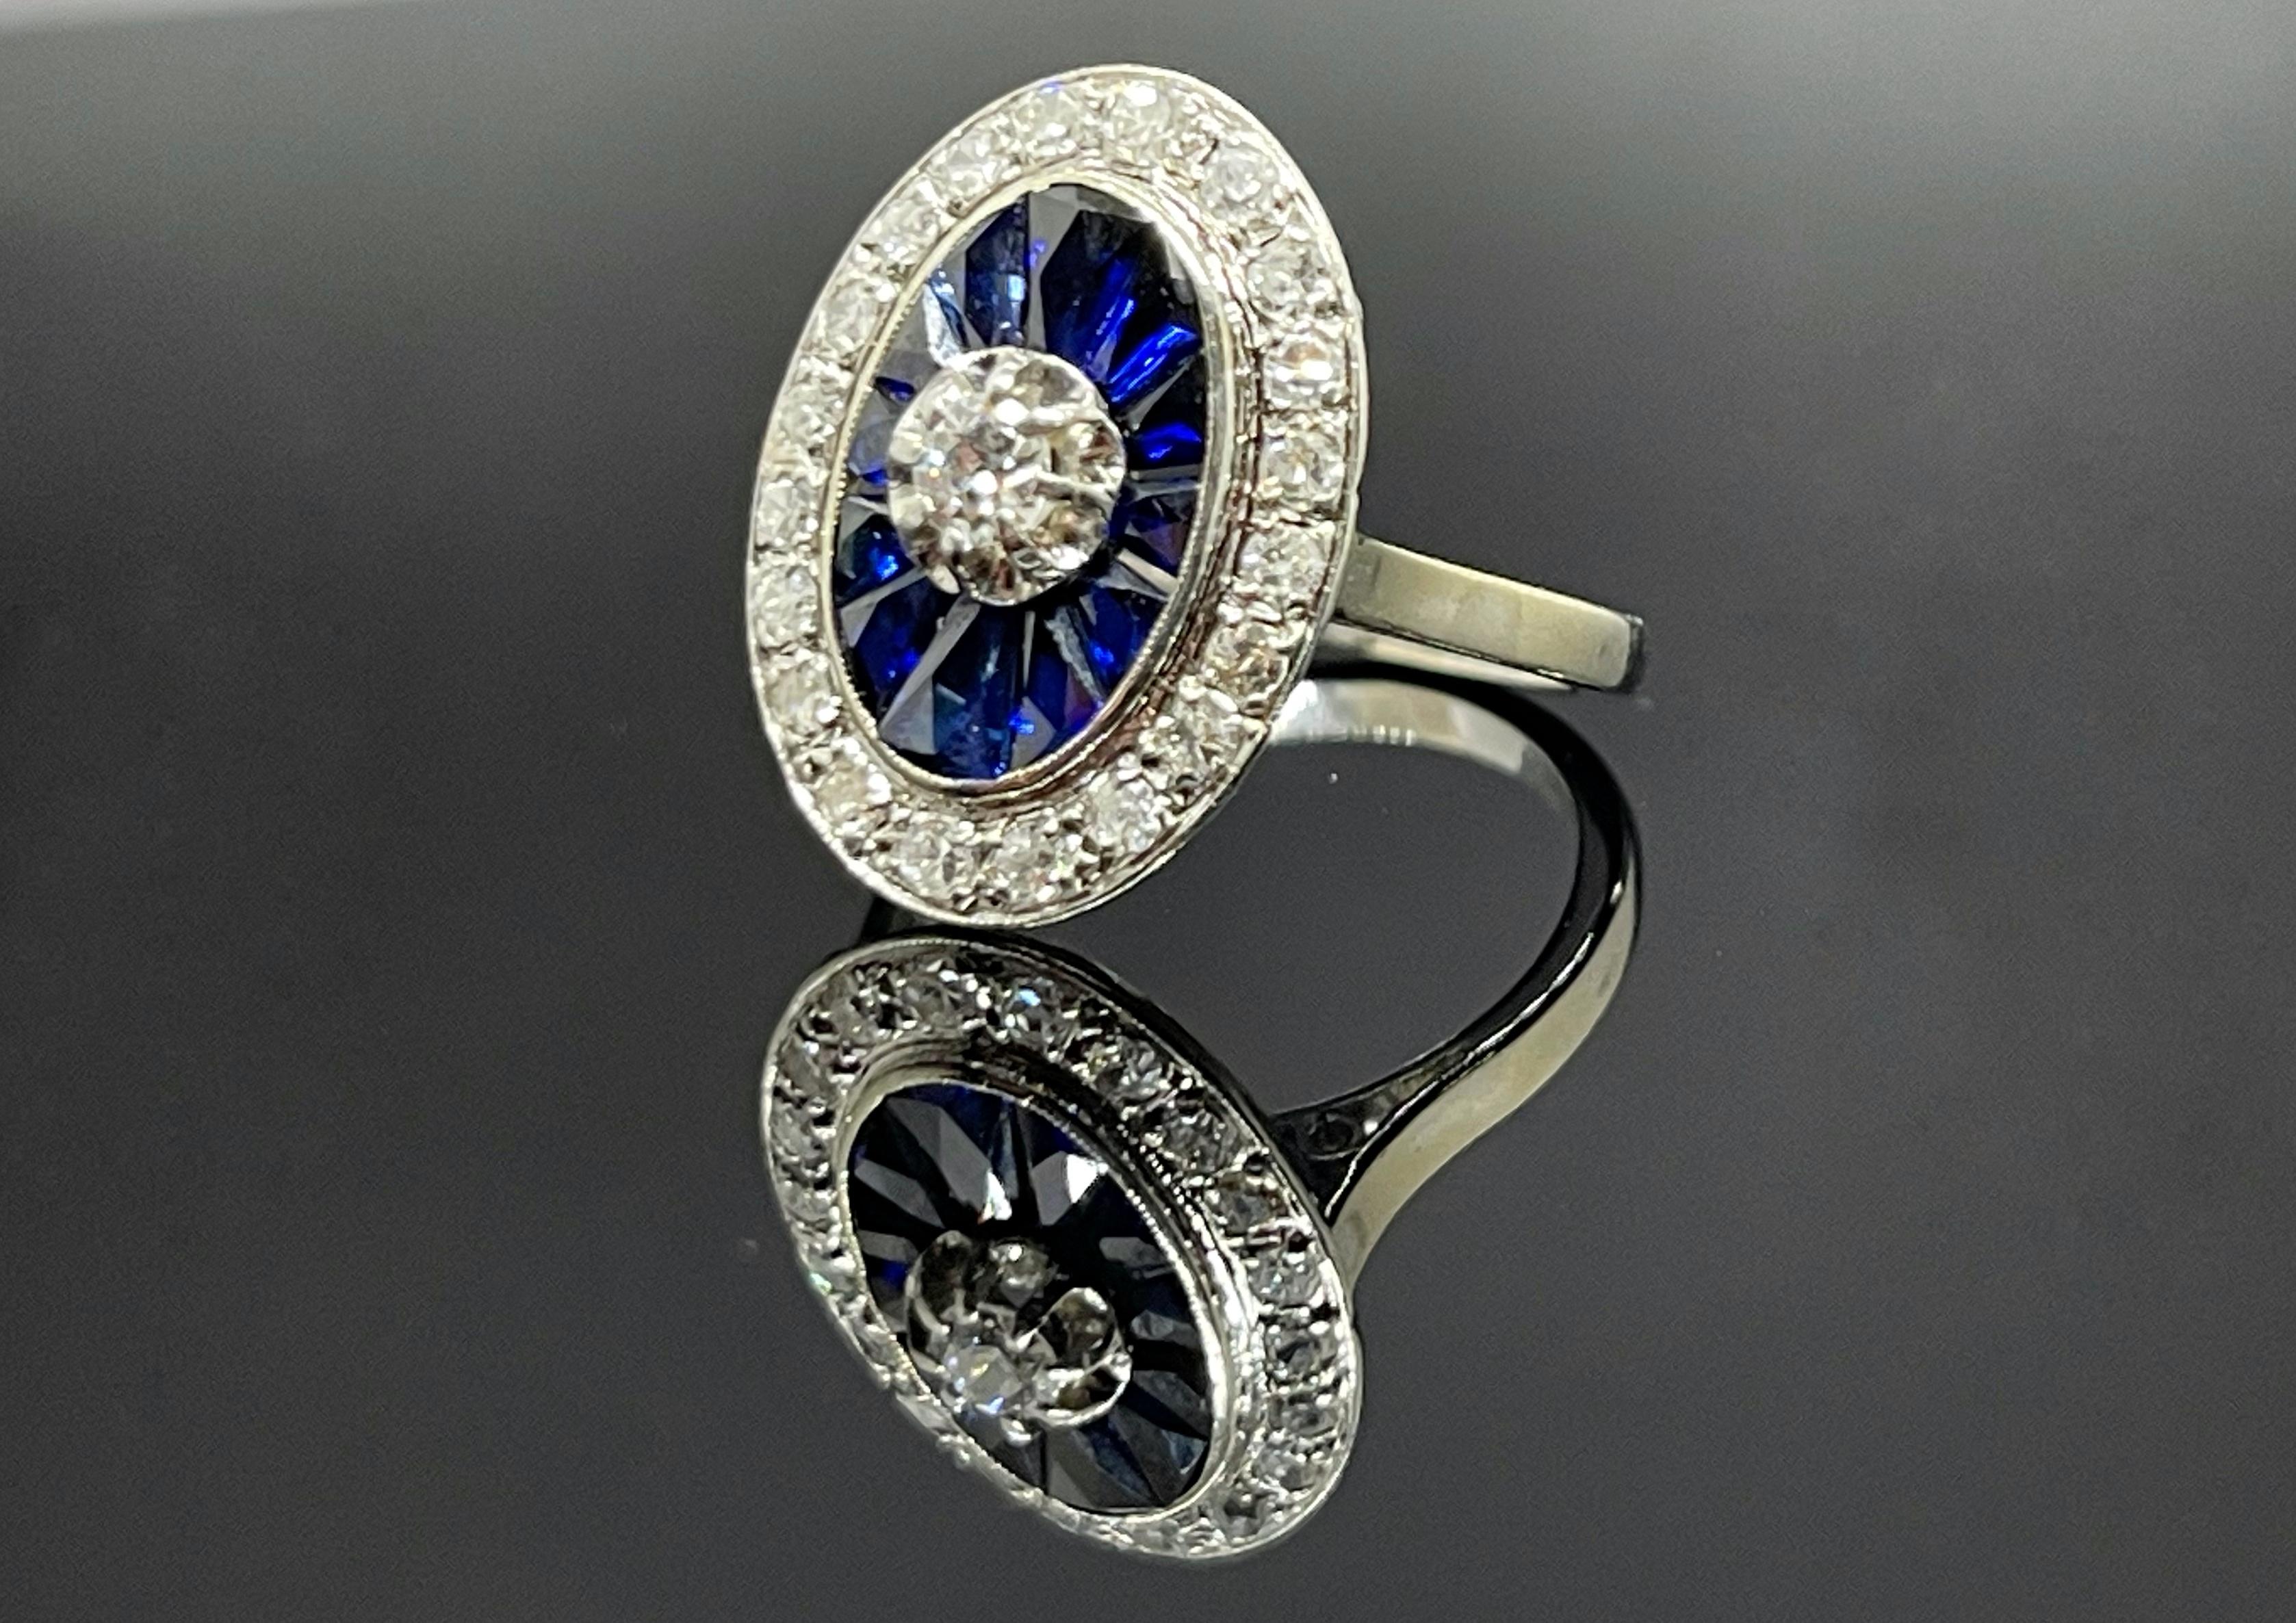 A beautiful Art Deco ring made of 18K white gold. With Royall Bleu Sapphires from Ceylon. It features 1.0 carat diamond approximately. 

The ring comes complete with a presentation box and our own certificate.

EU size: 52
US size: 6,5
Can be